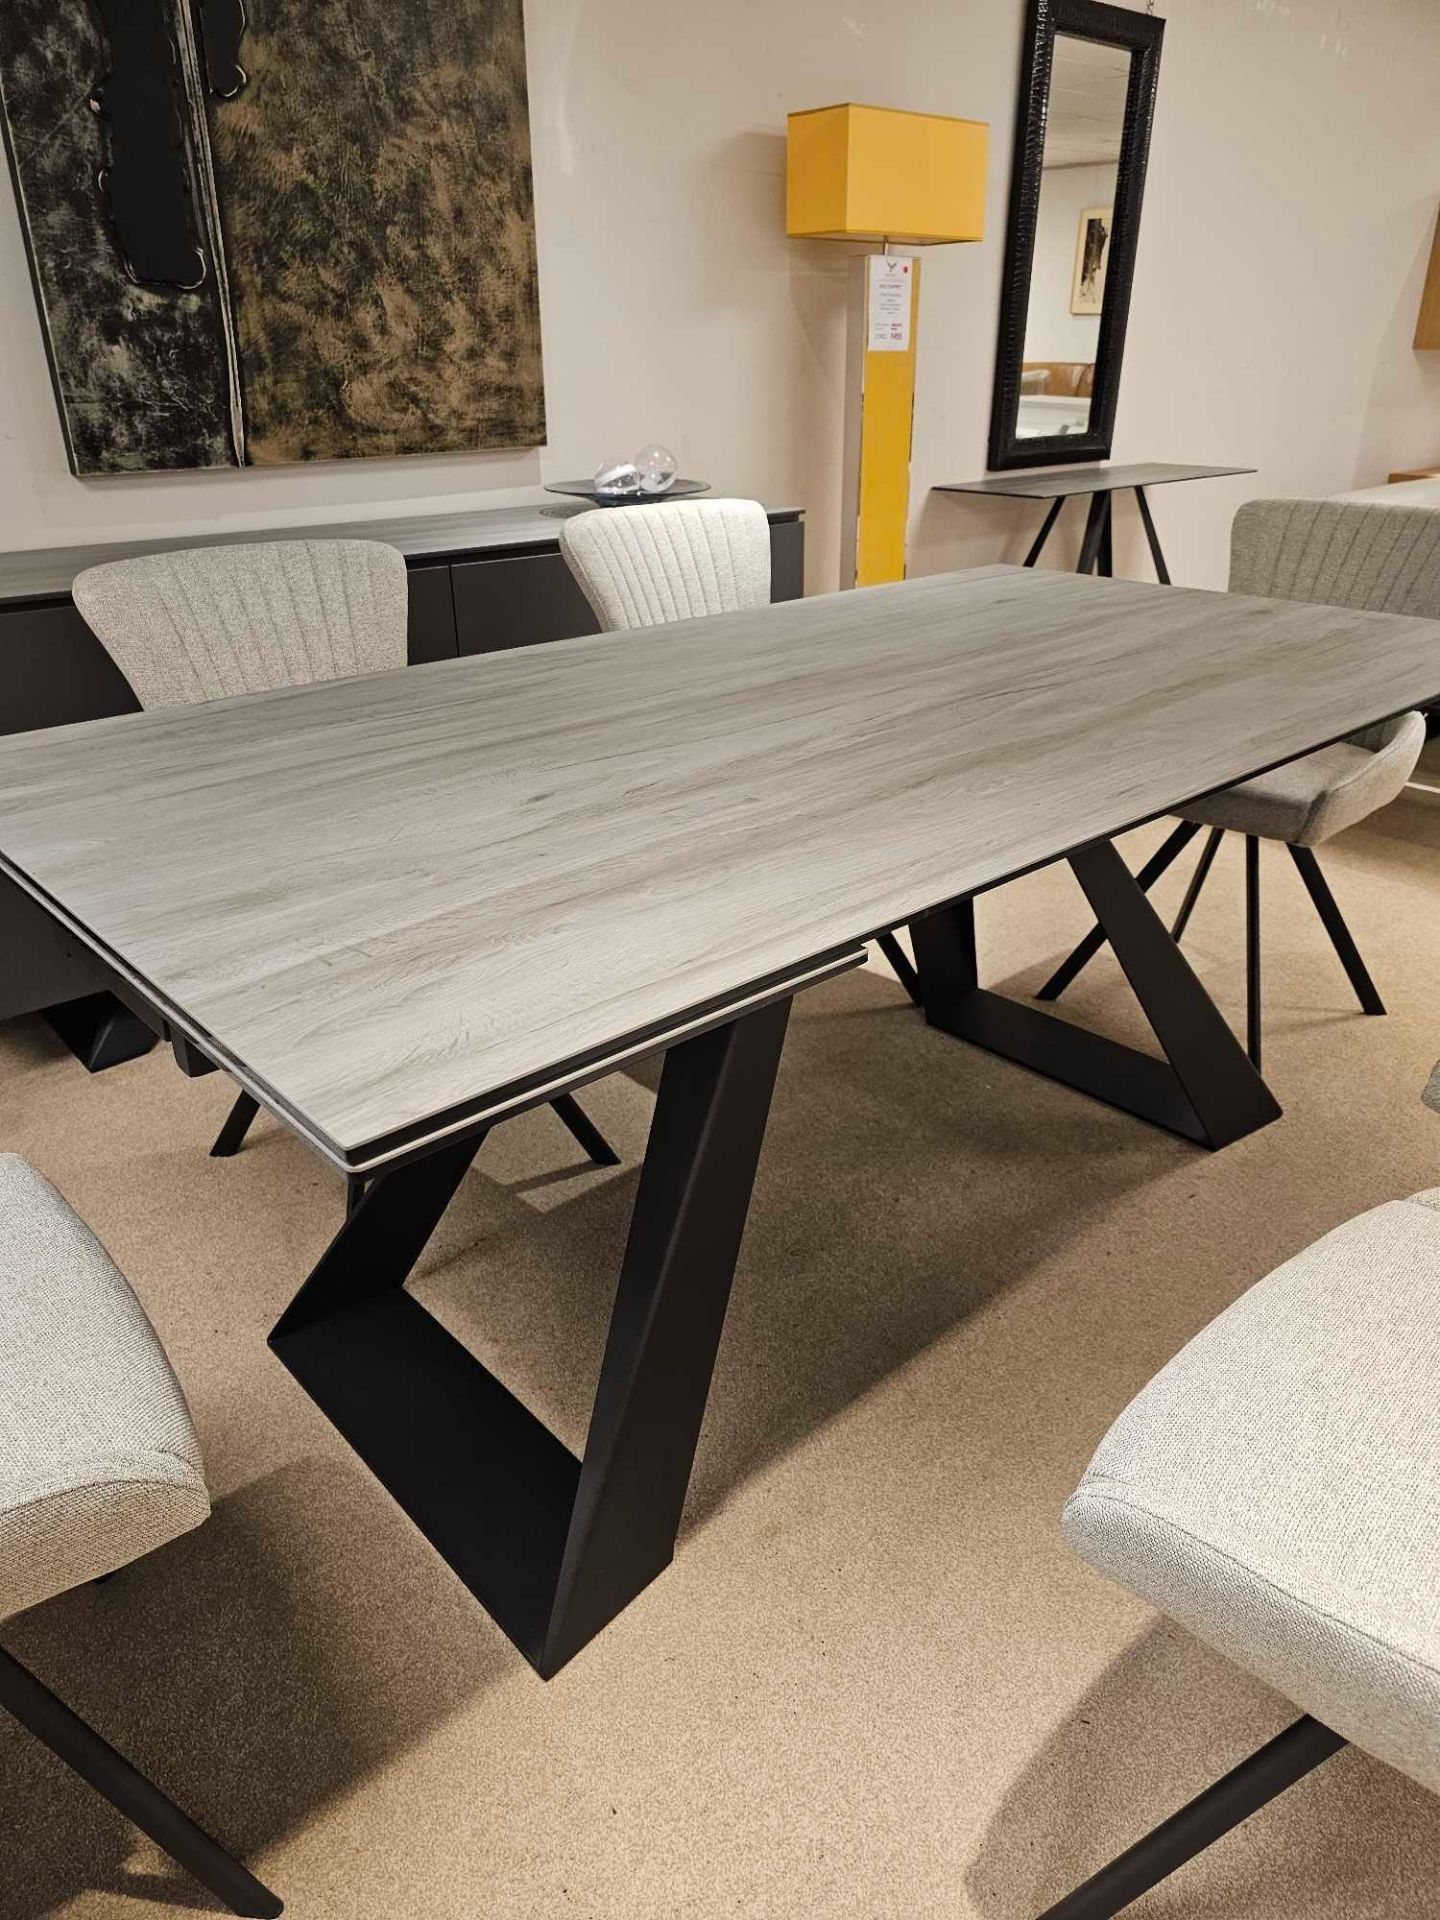 Spartan Dining Table by Kesterport The Spartan Dining Table is part of a sophisticated collection of - Image 5 of 12